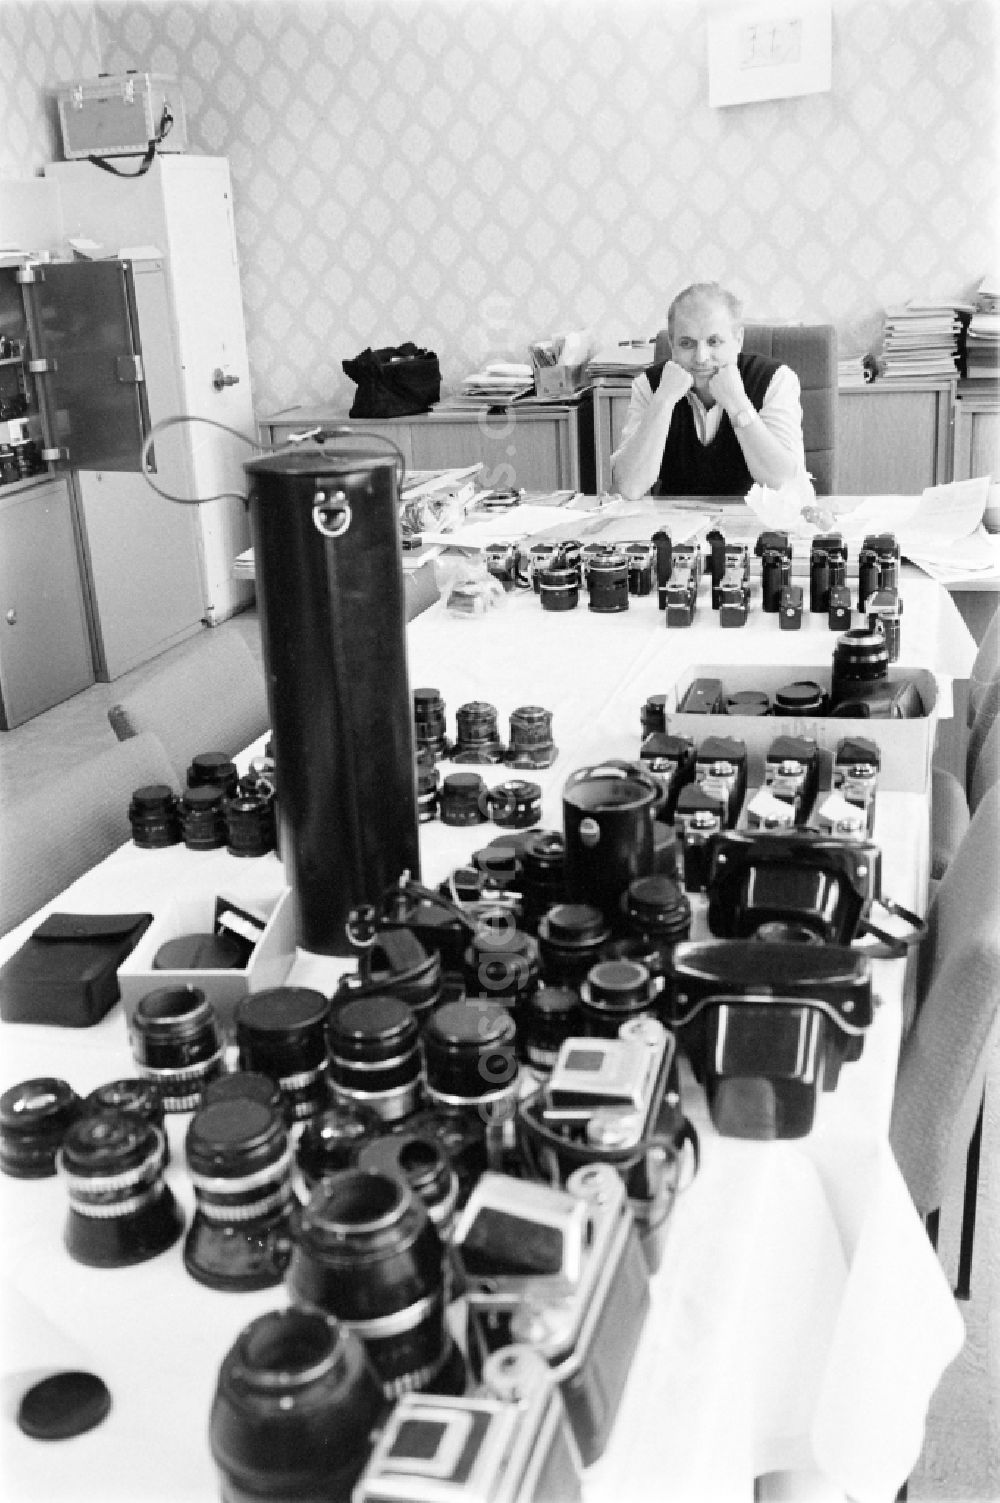 GDR image archive: Berlin - Chief photo reporter Dr. Gerhard Murza in front of photo equipment, lenses and cameras, on a table of the Neues Deutschland ND photo editorial department at Franz-Mehring-Platz in the Friedrichshain district of Berlin